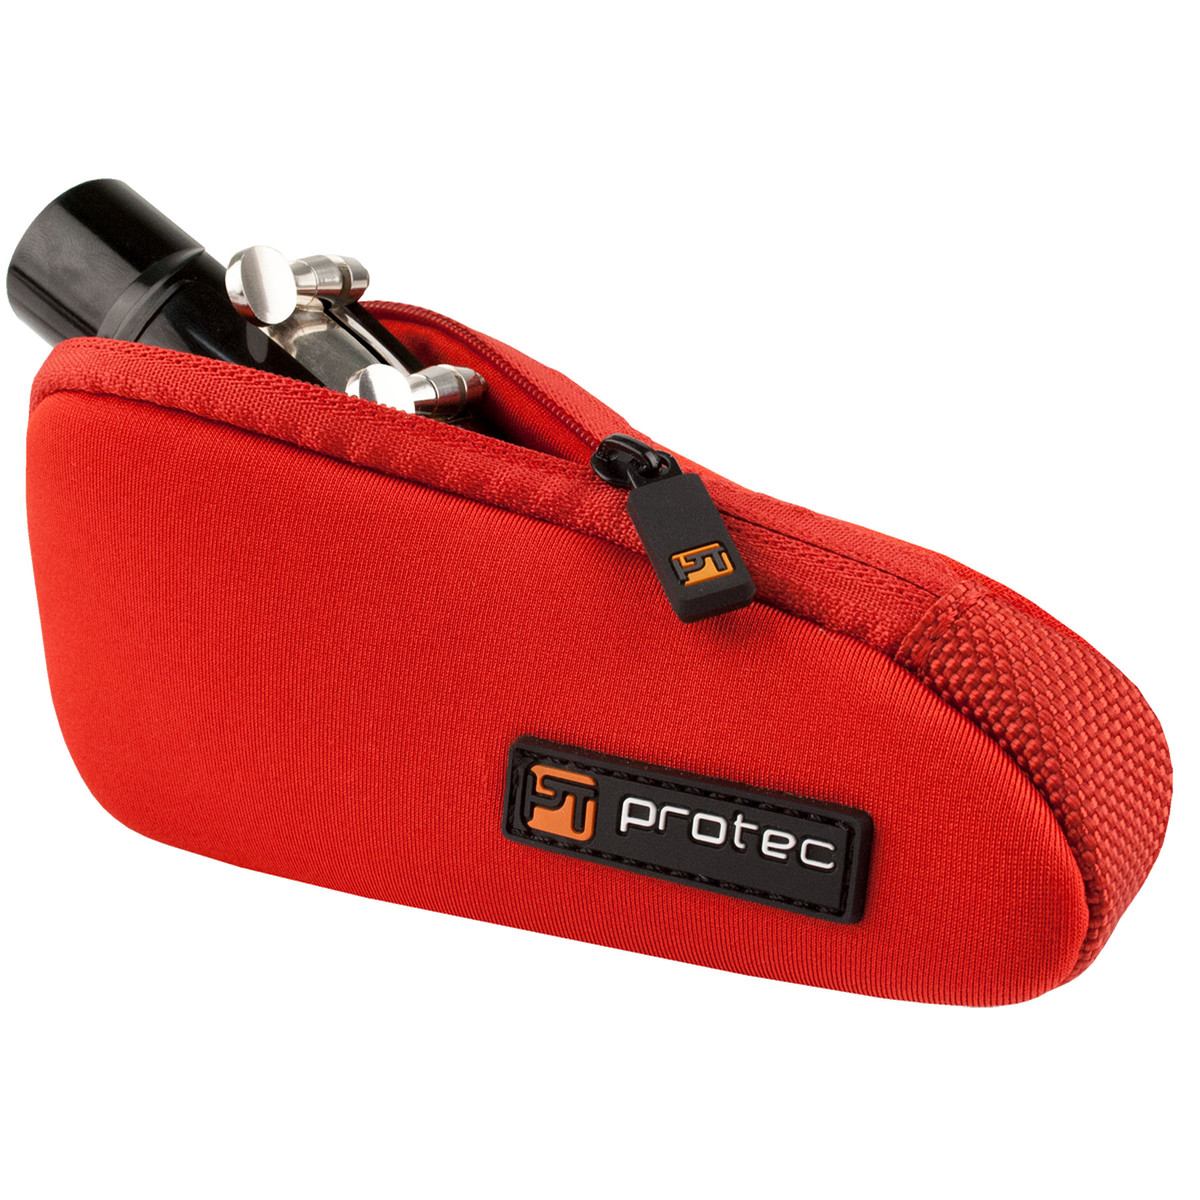 Red neoprene mouthpiece pouch